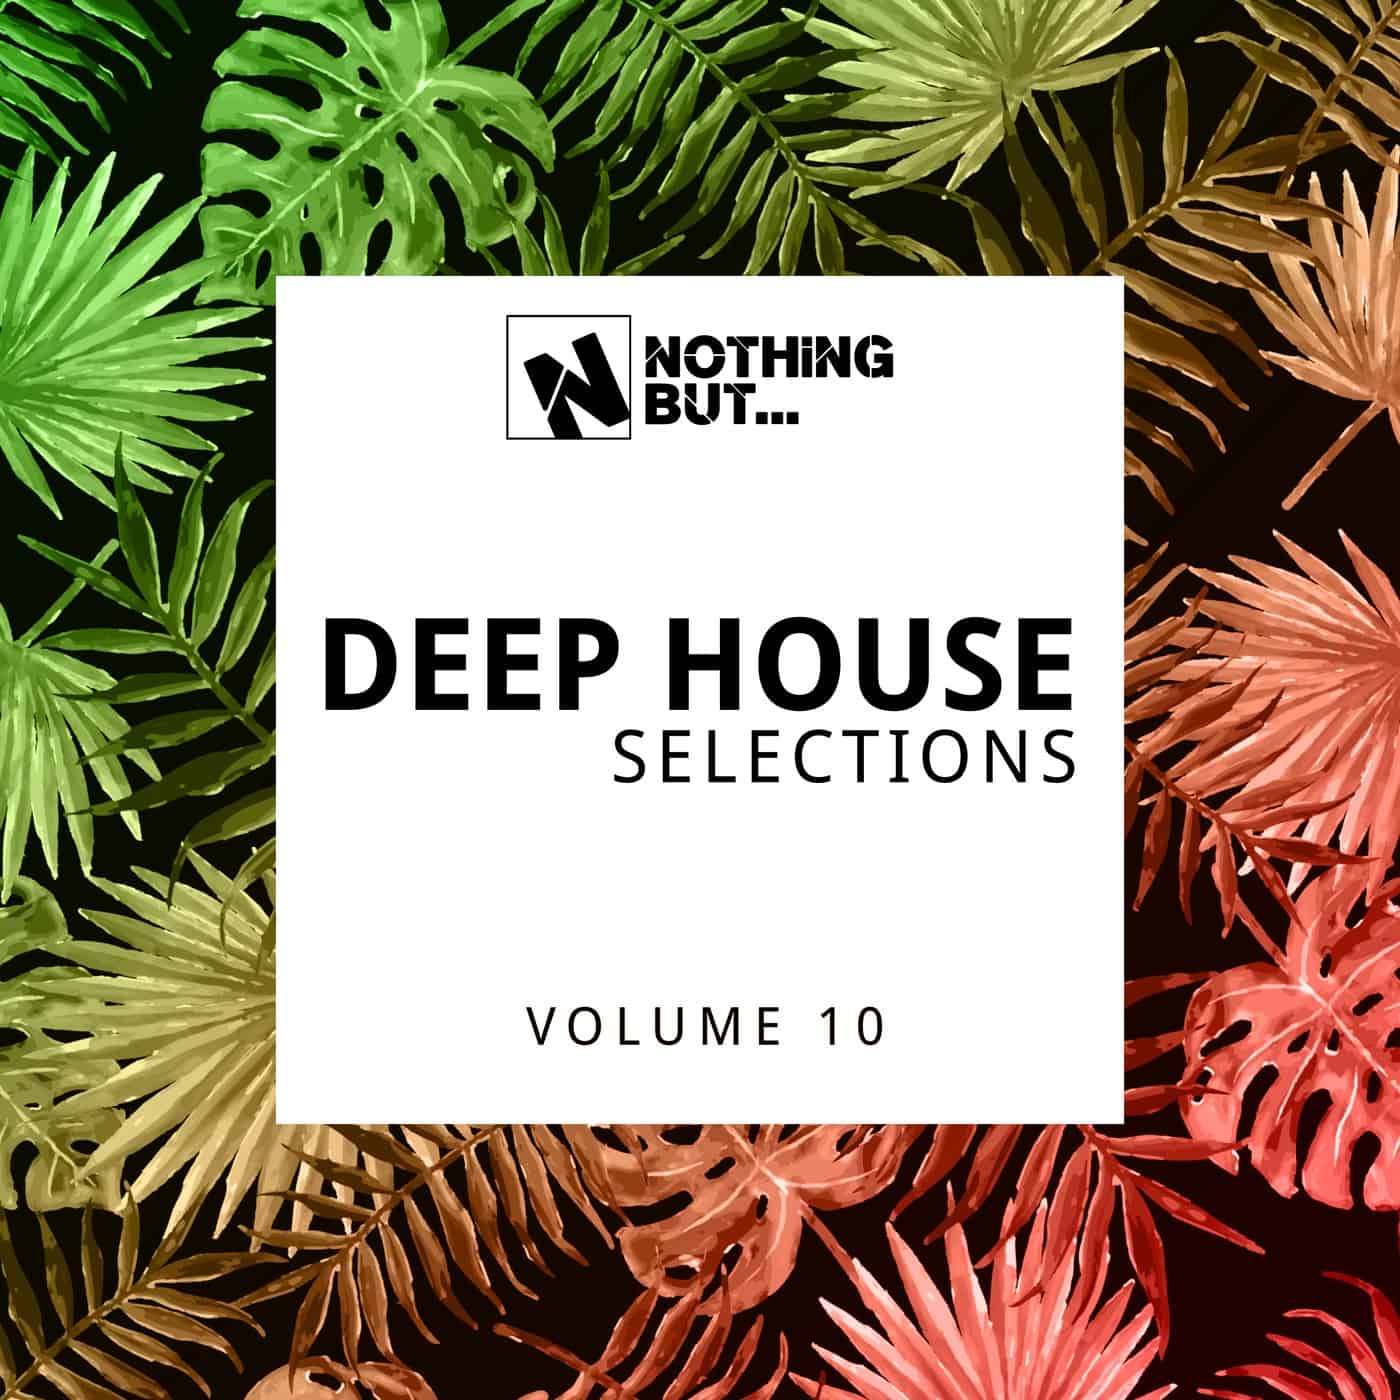 image cover: VA - Nothing But... Deep House Selections, Vol. 10 / NBDHS10